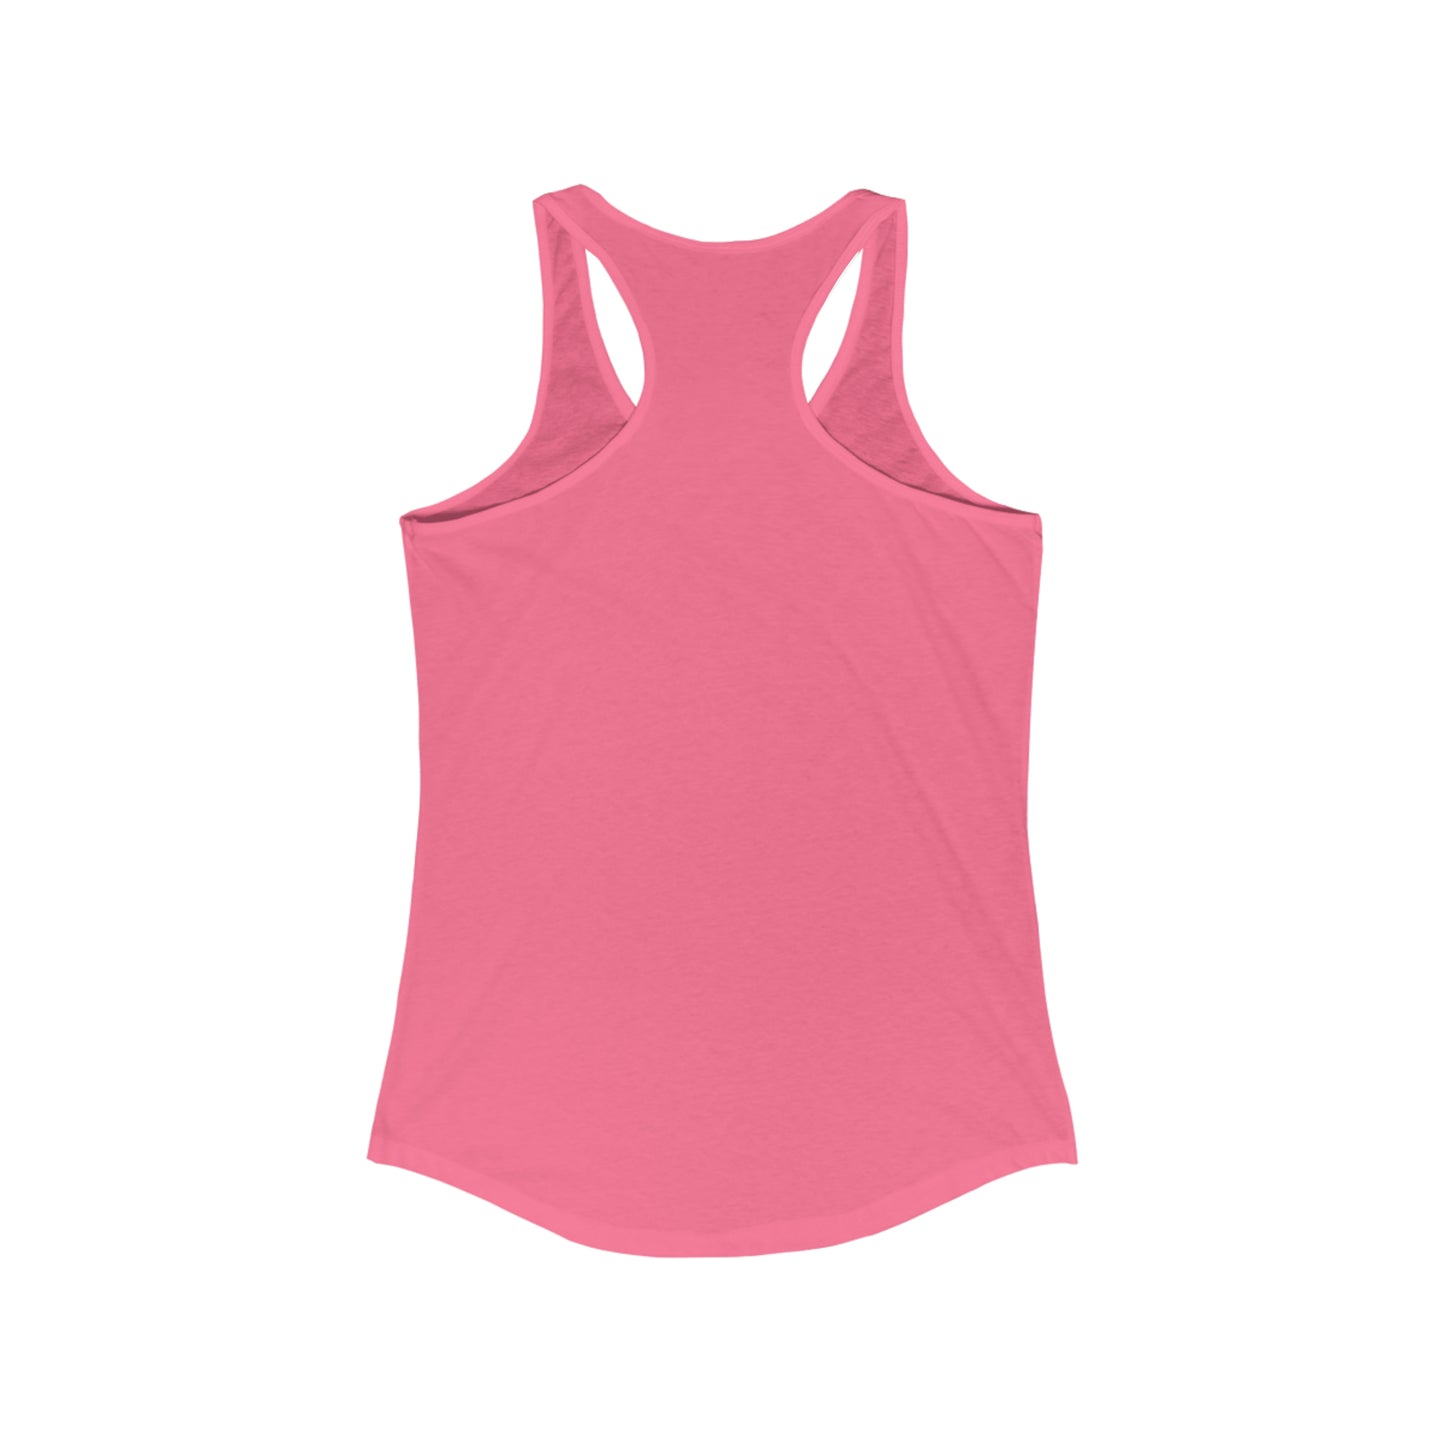 Work until your Signature becomes your Autograph - Women's Ideal Racerback Tank